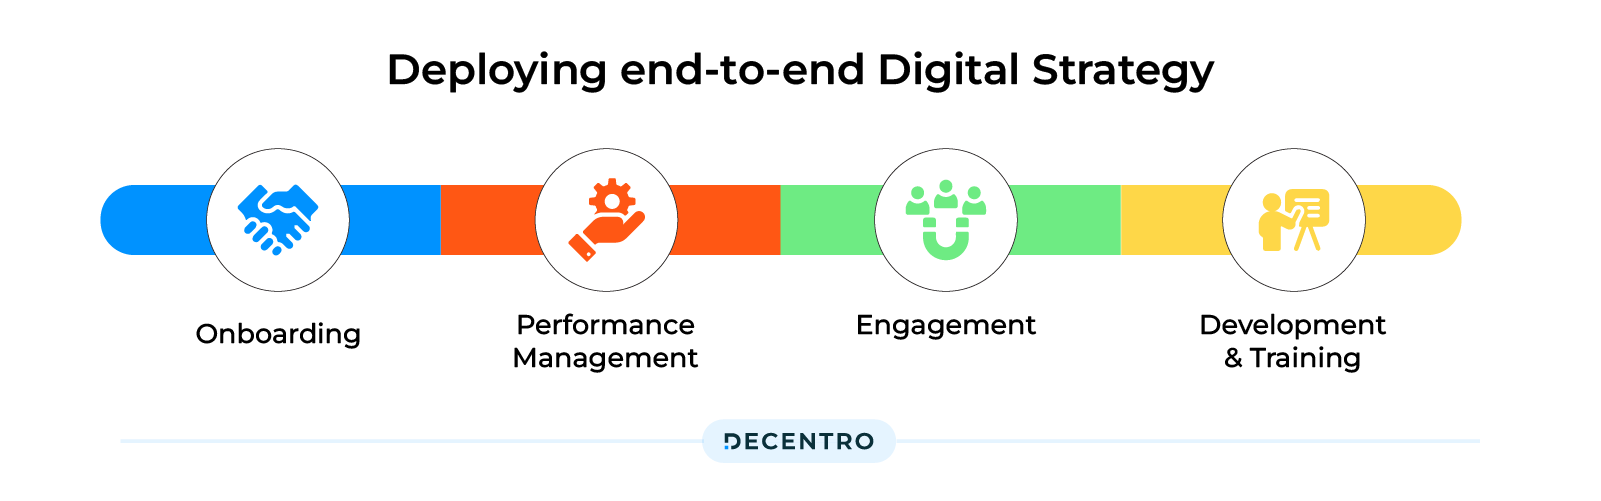 Digital strategy of HR Department at Decentro